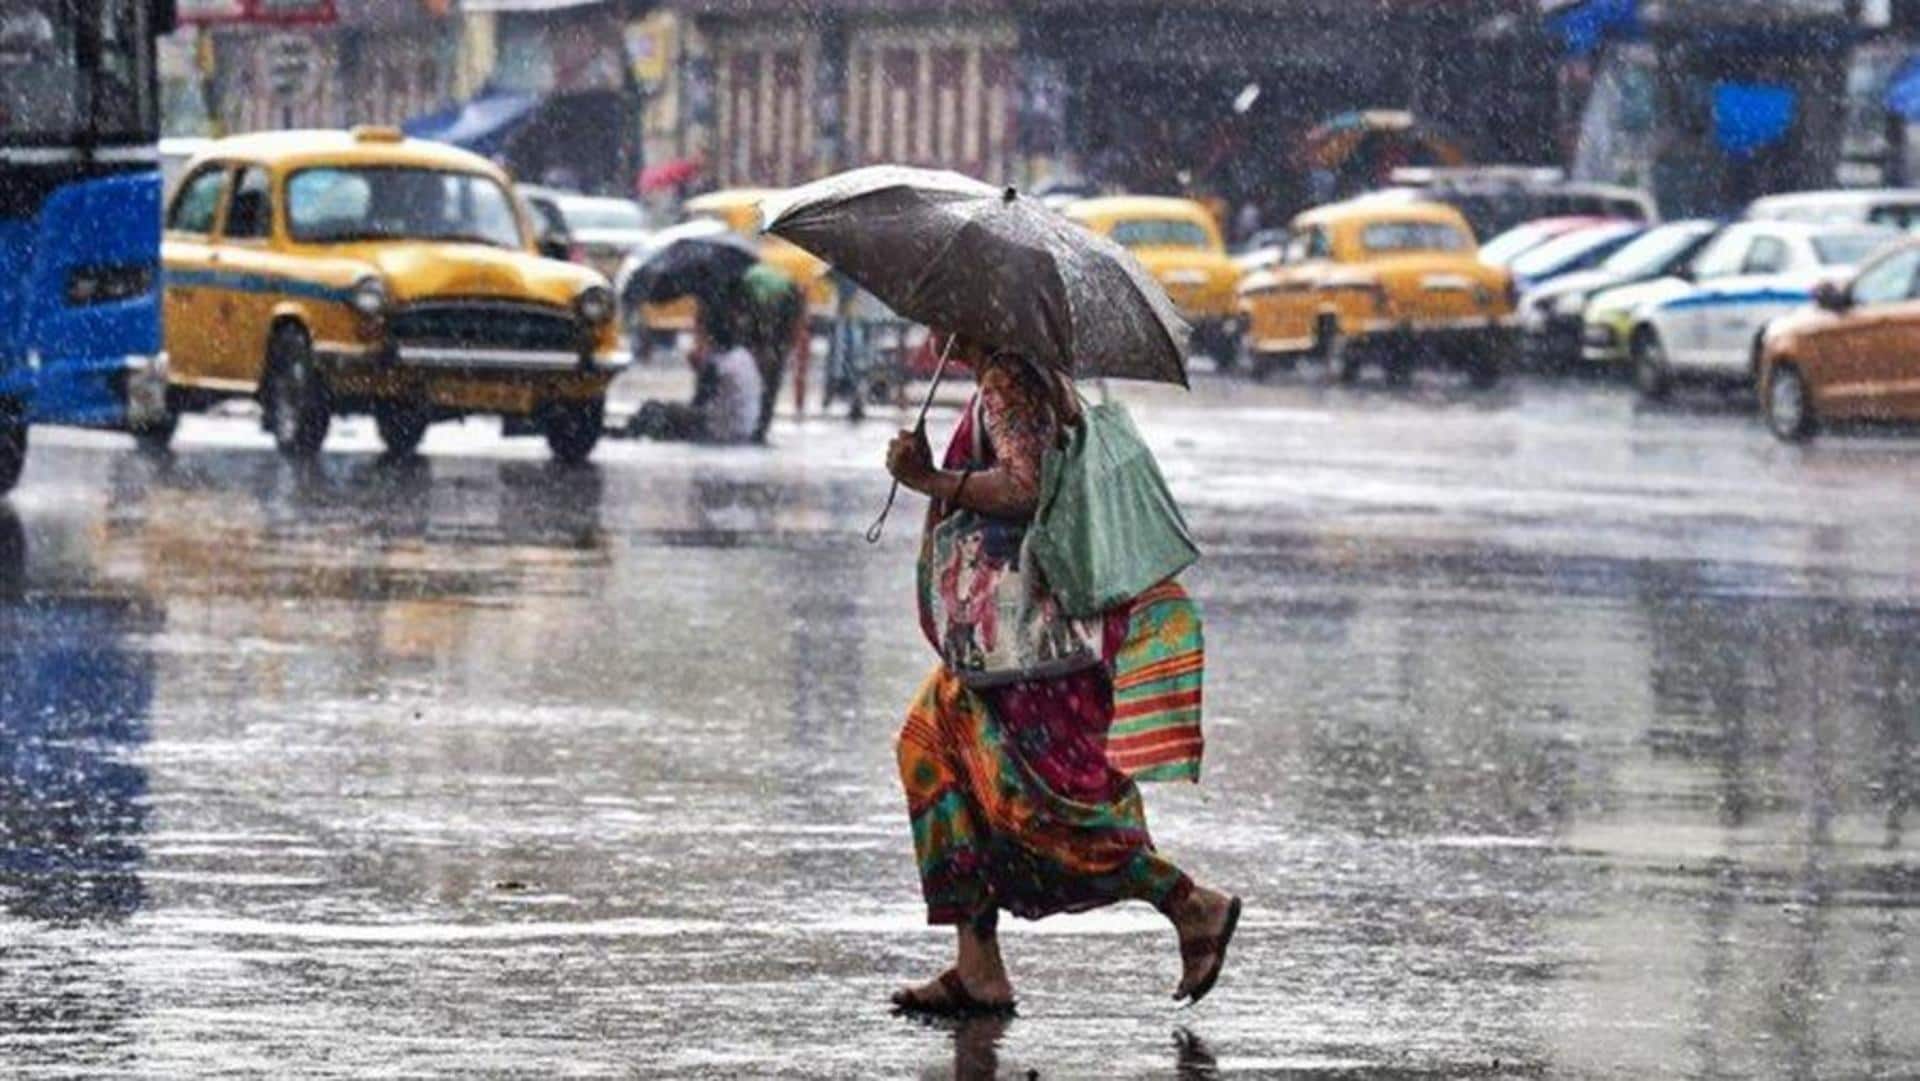 Monsoon may arrive in Mumbai this weekend, yellow alert issued